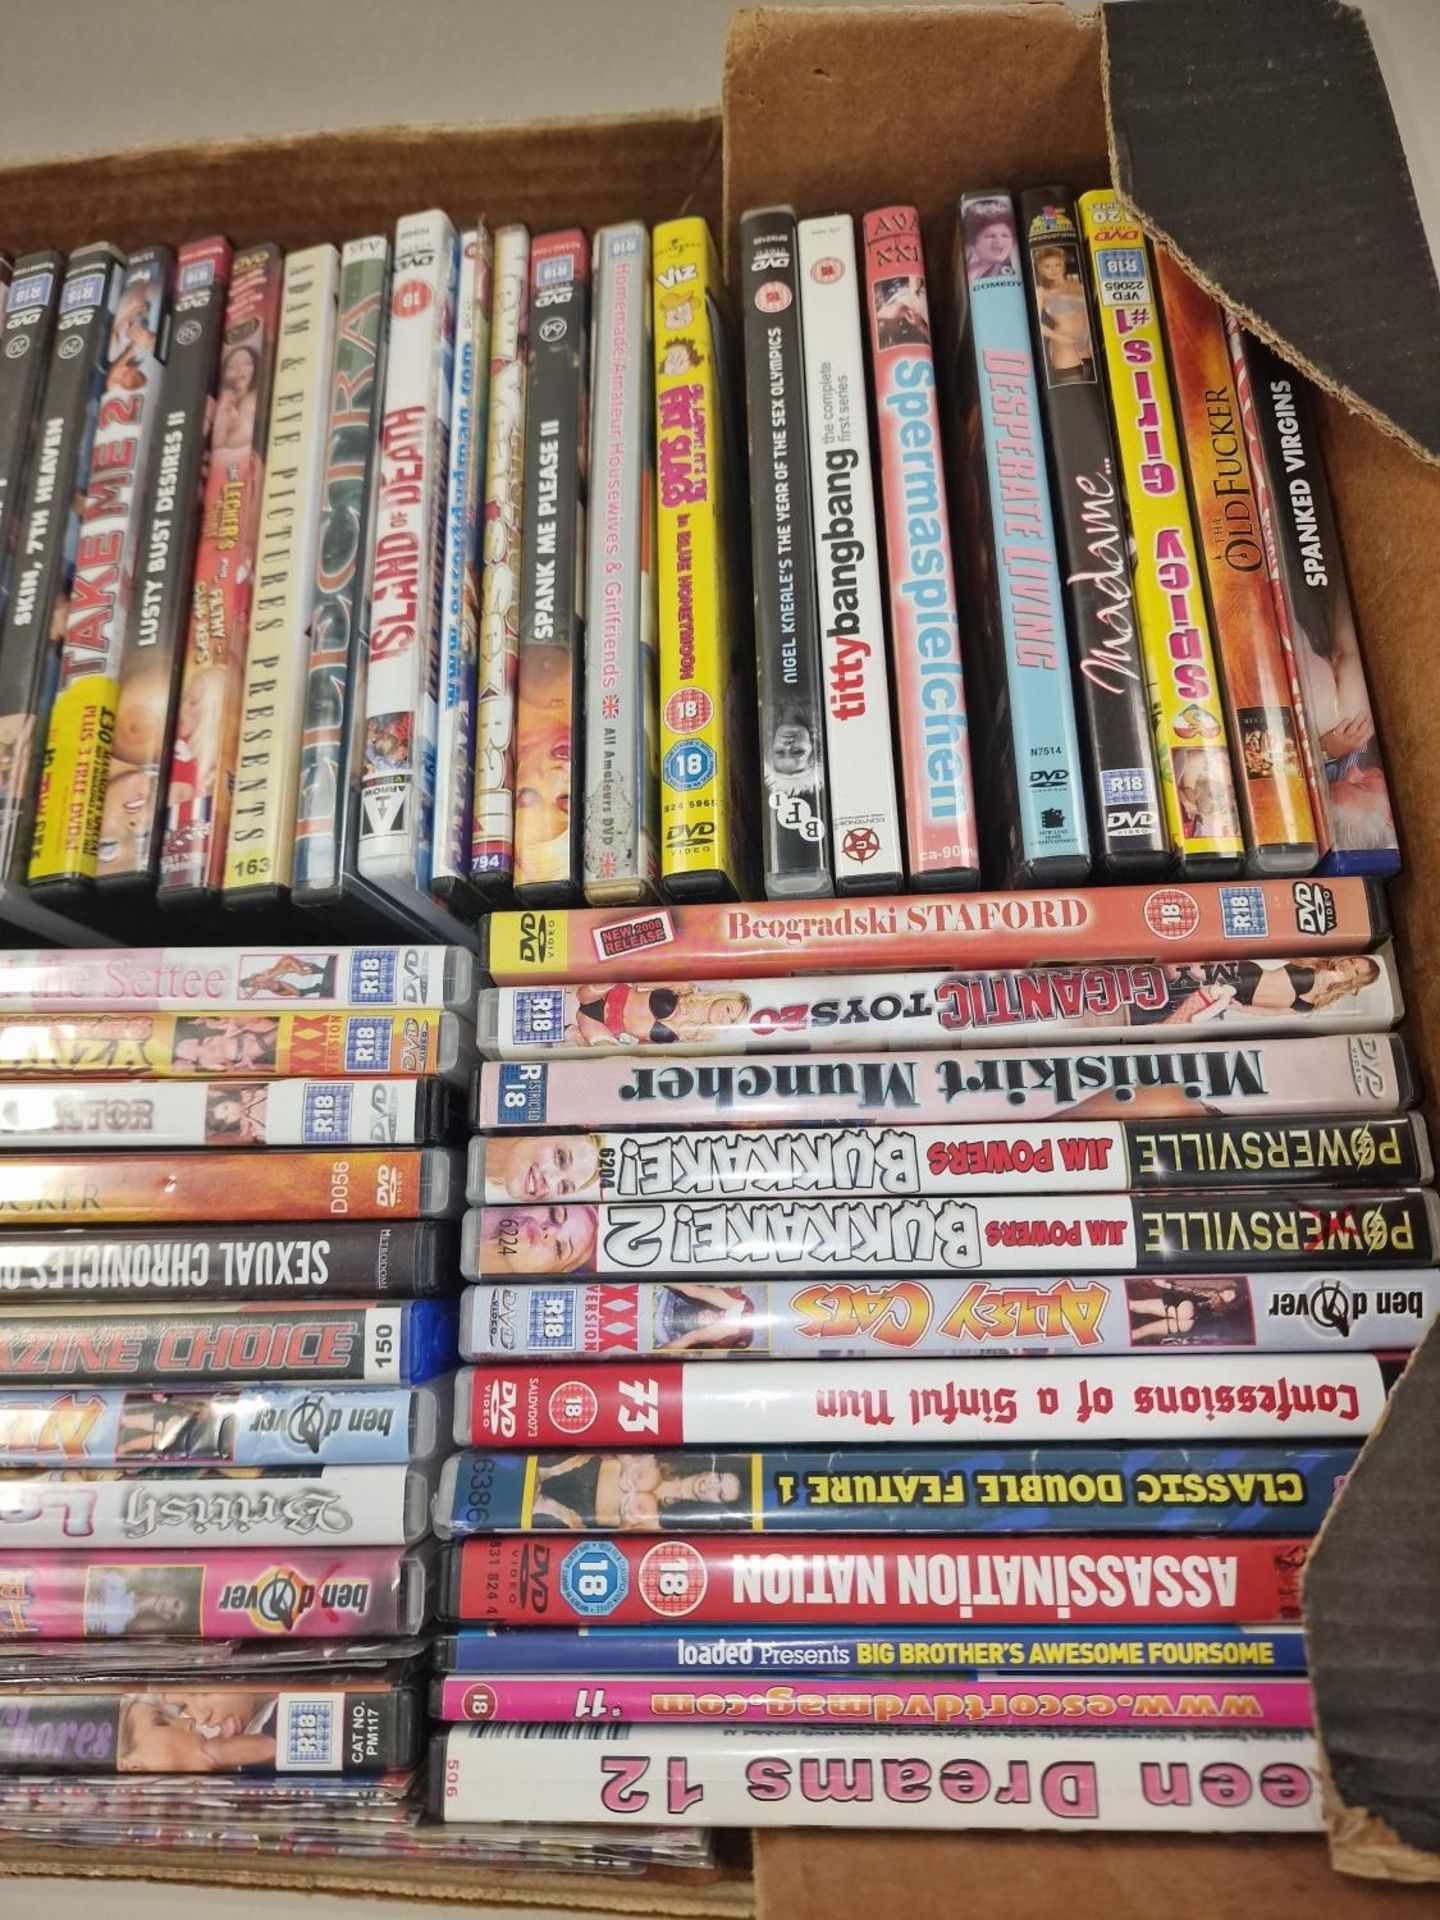 Large tray of various naughty X rated pornographic DVD’s. - Image 3 of 3